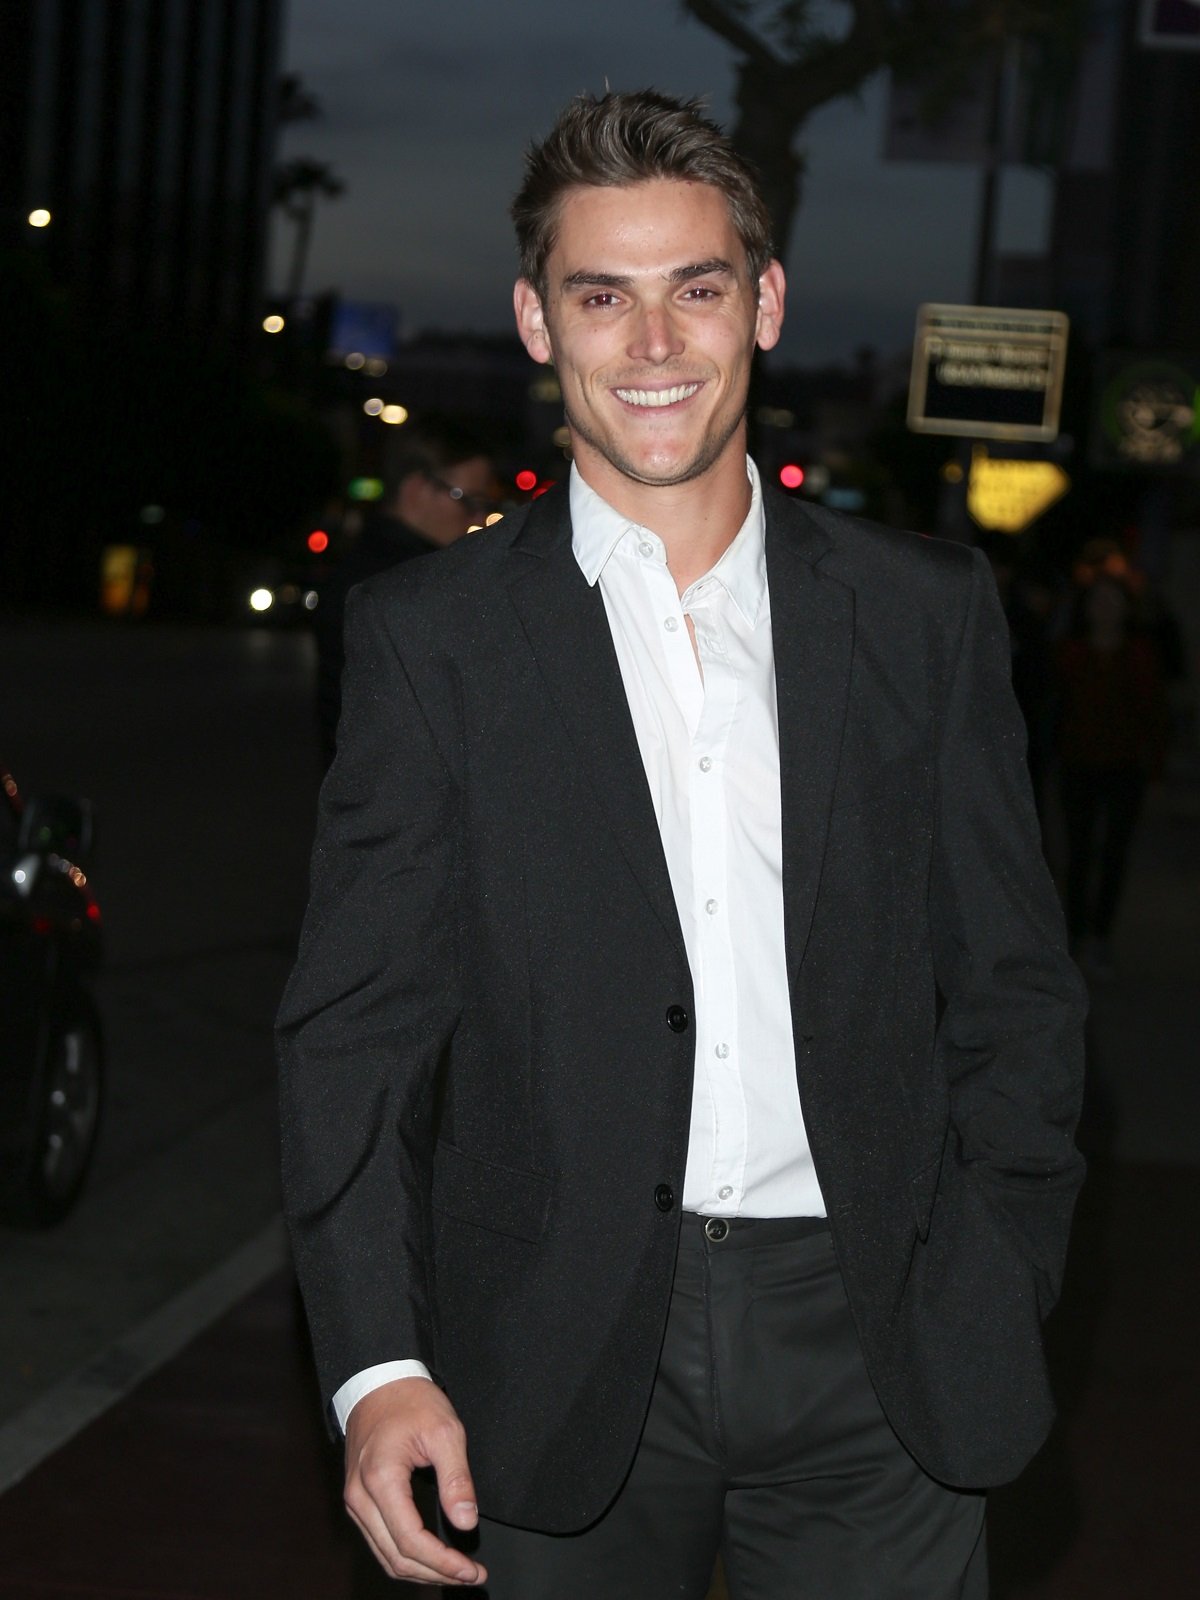 'The Young and the Restless' actor Mark Grossman at the 2016 movie premiere of South 32.